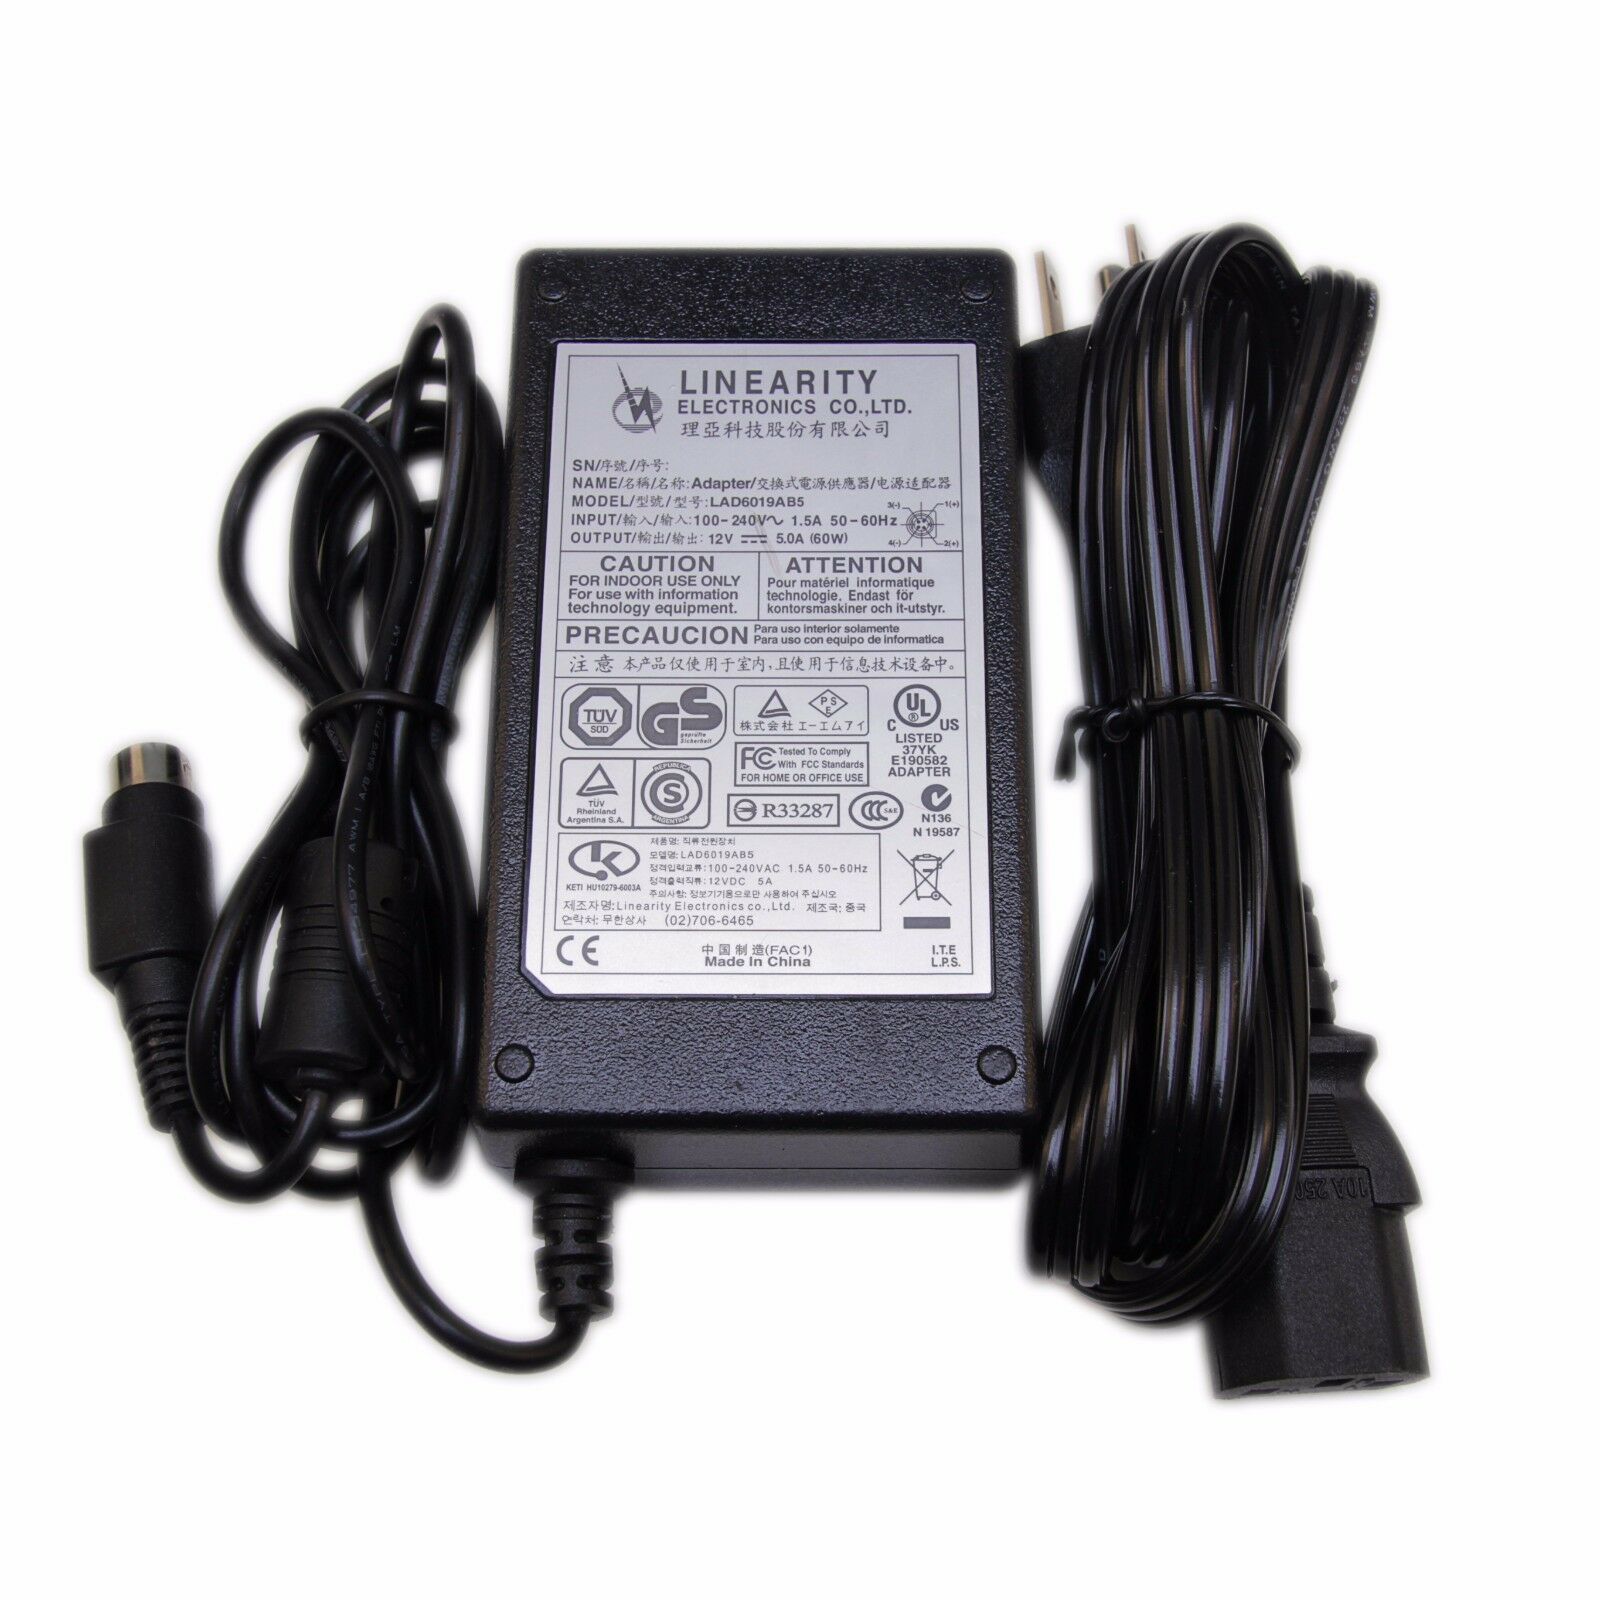 NEW LINEARITY 12V 5.0A 60W LAD6019AB5 AC/DC Adapter Power Supply Charger 4-pin - Click Image to Close